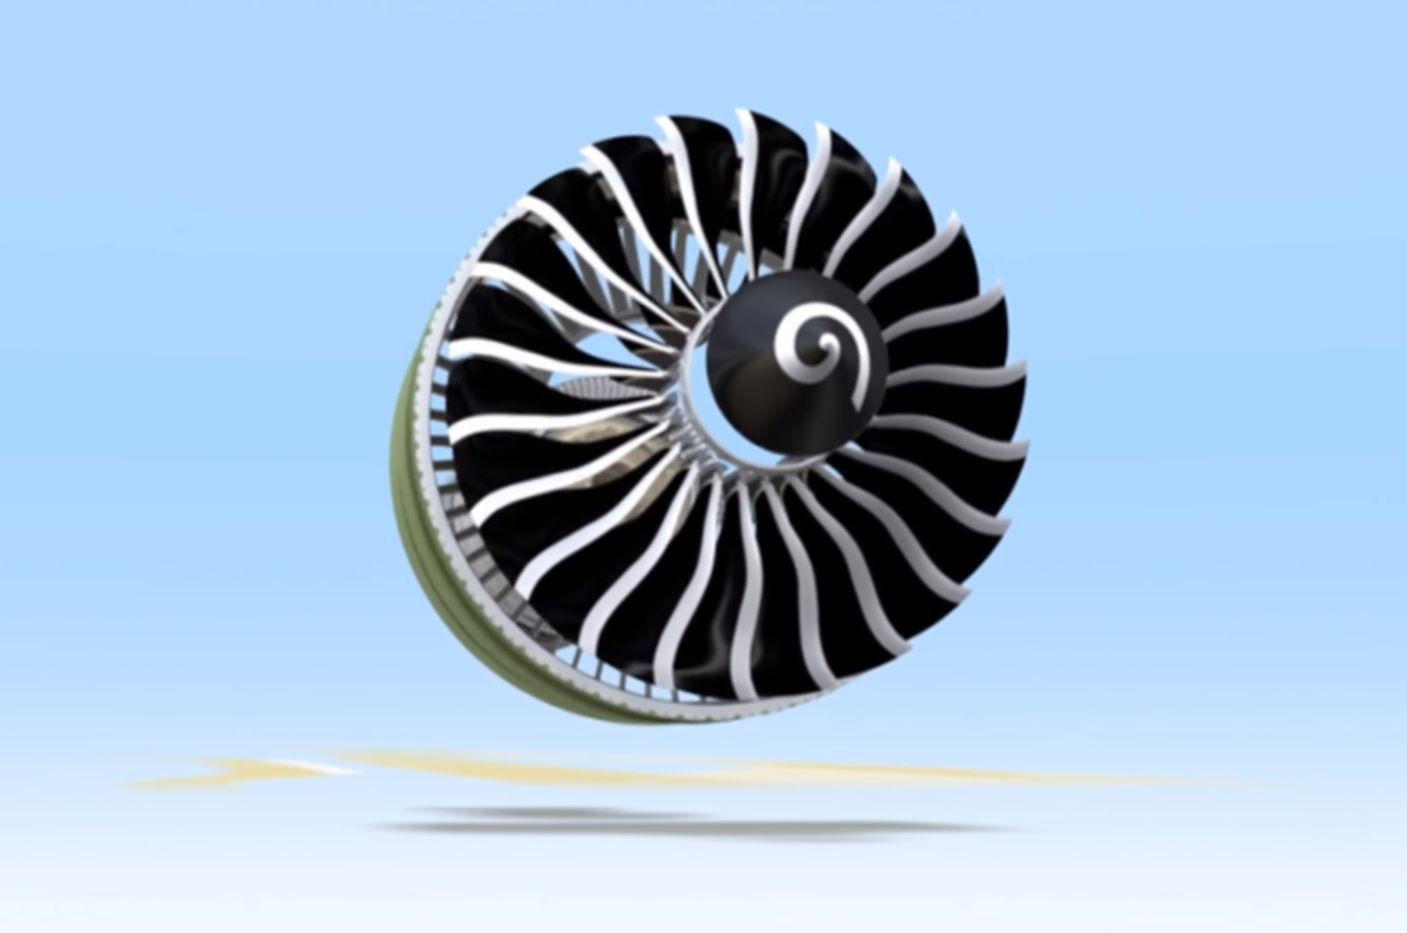 GE Aviation: How to Build a First Engine to Test